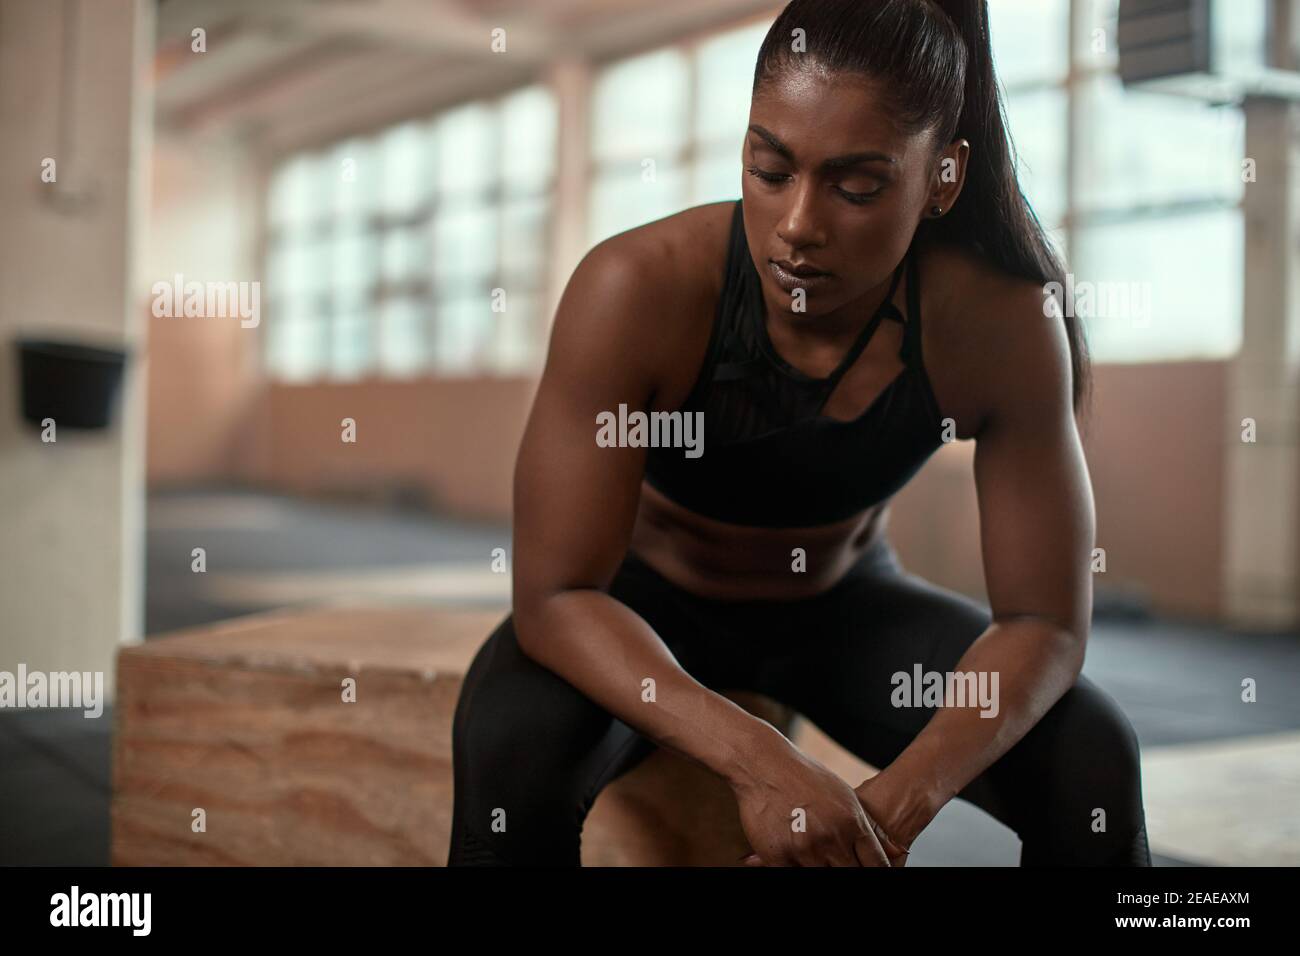 Muscular young Indian woman in sportswear looking tired after a workout session at the gym Stock Photo